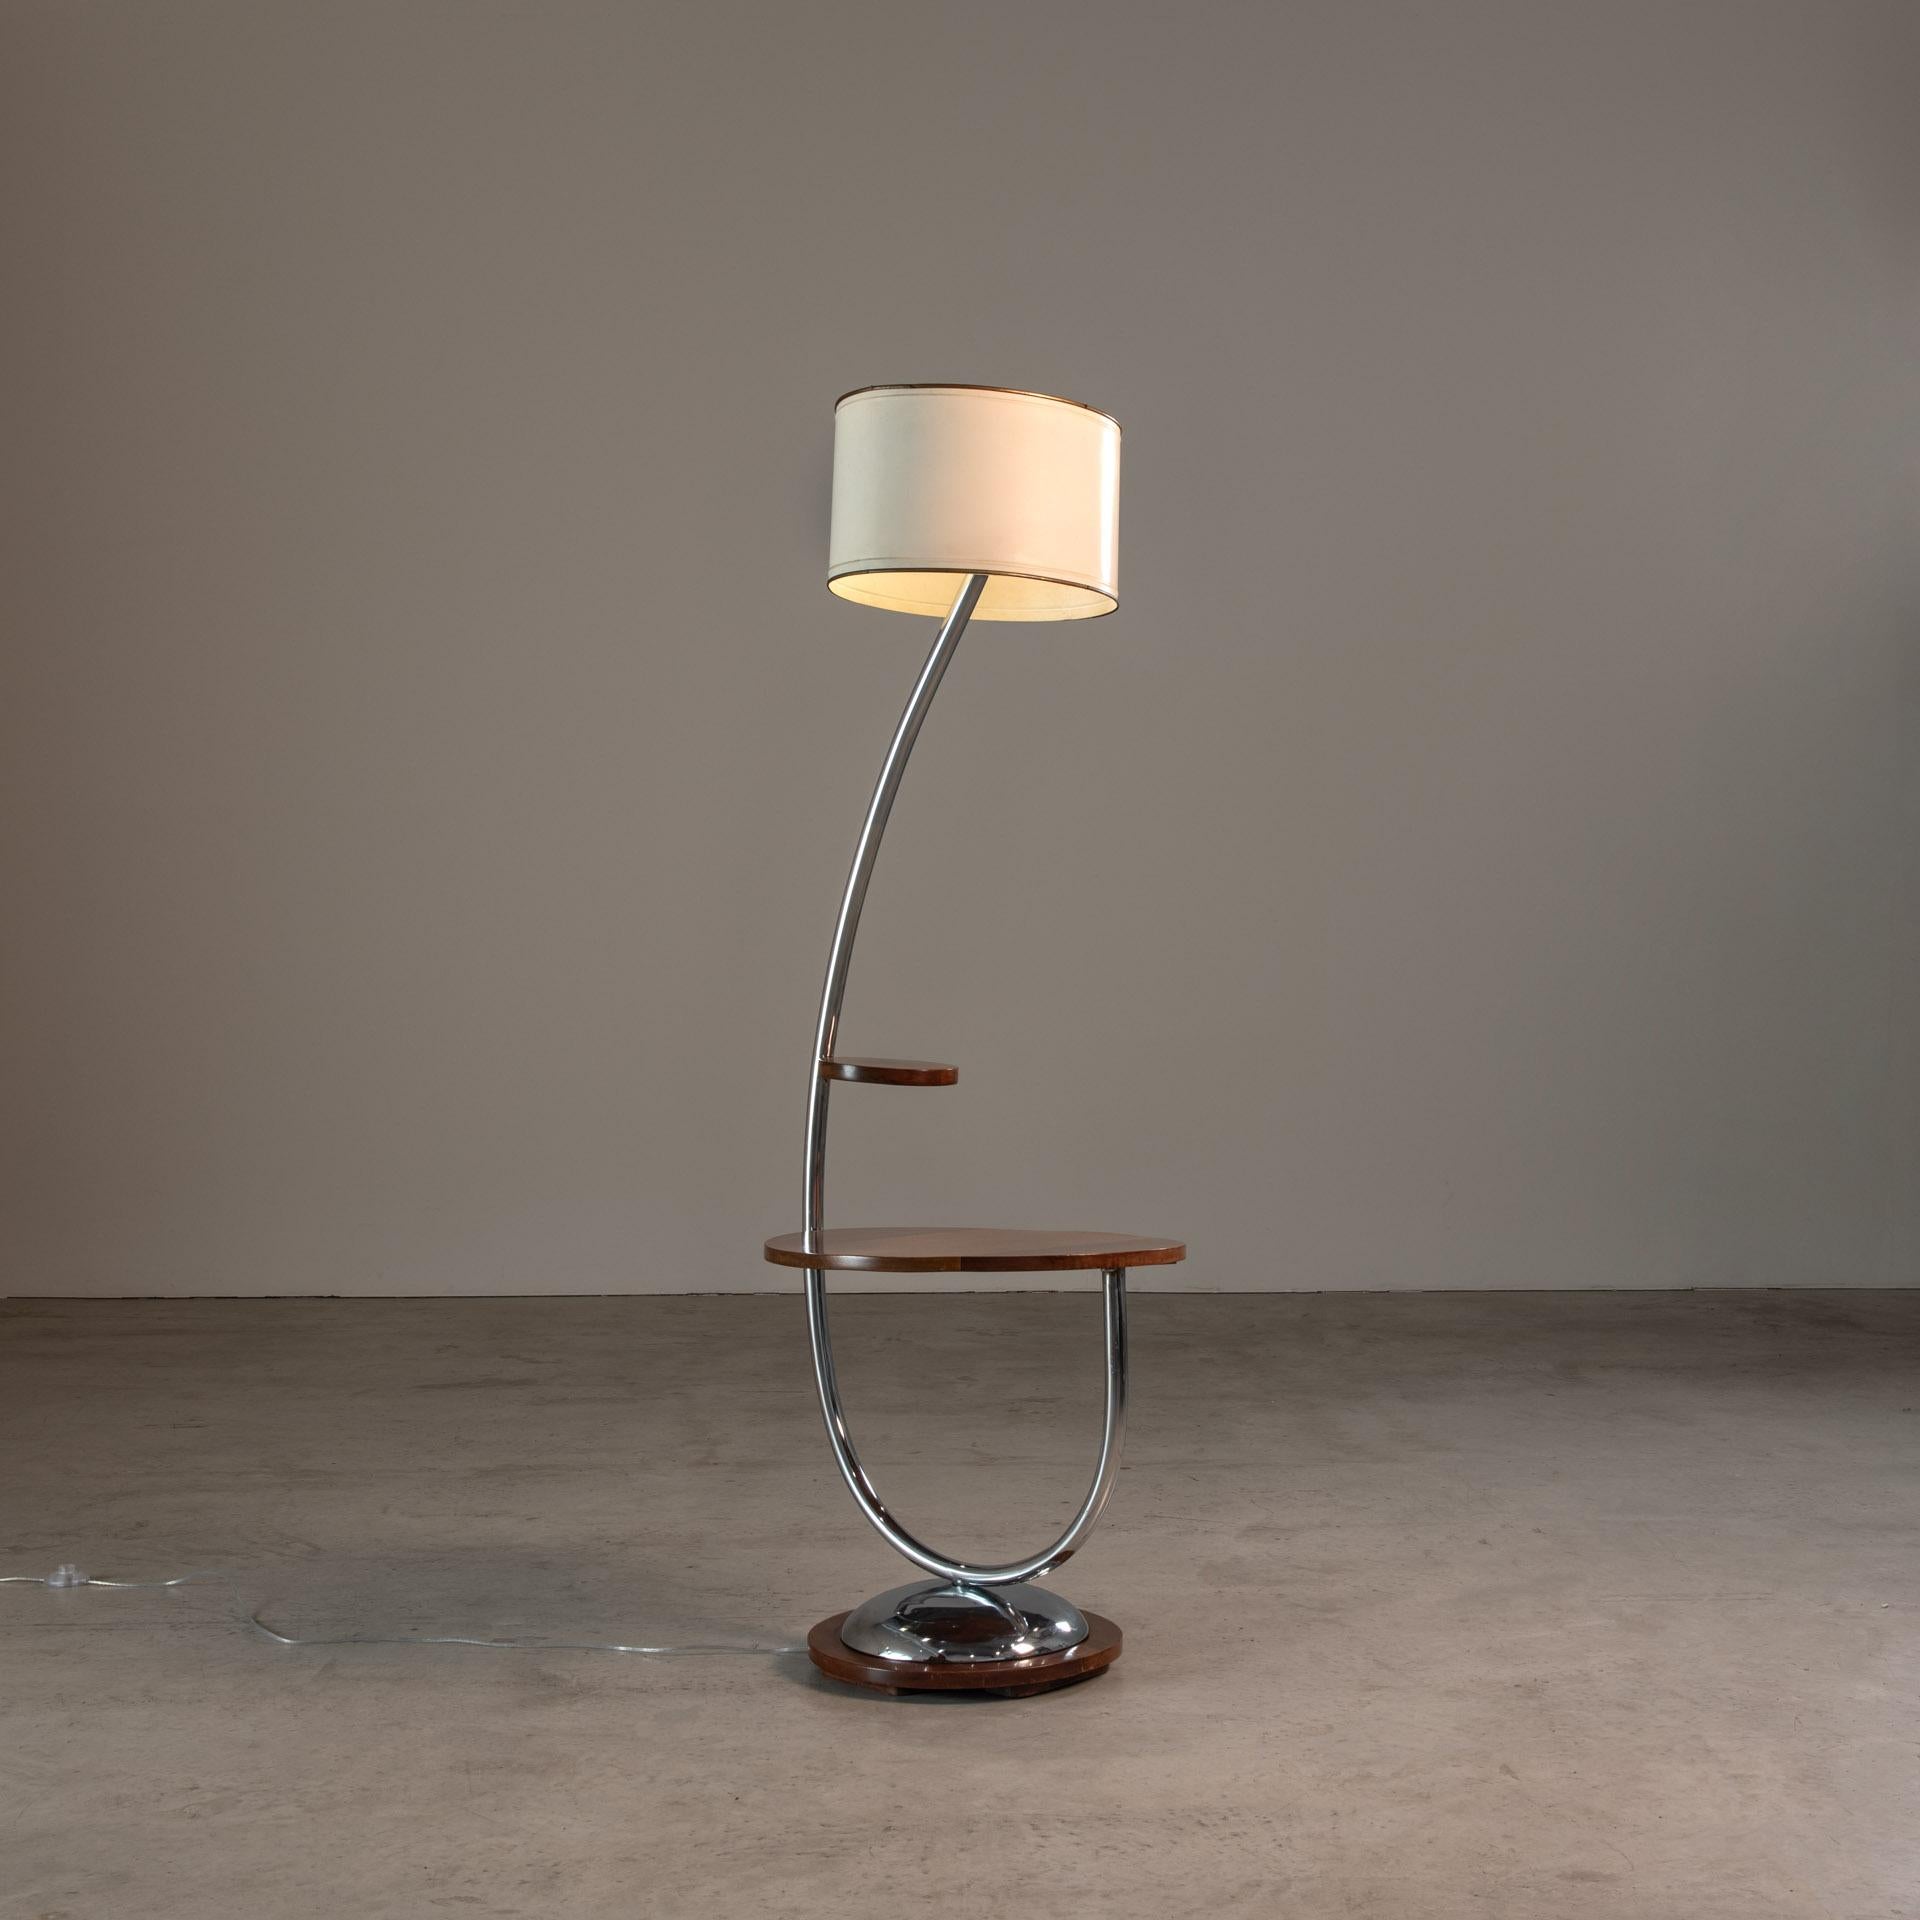 The side table with an integrated floor lamp, a masterful creation by John Graz, stands as a quintessential example of mid-20th century Brazilian furniture design. This piece not only showcases the innovative use of local materials but also